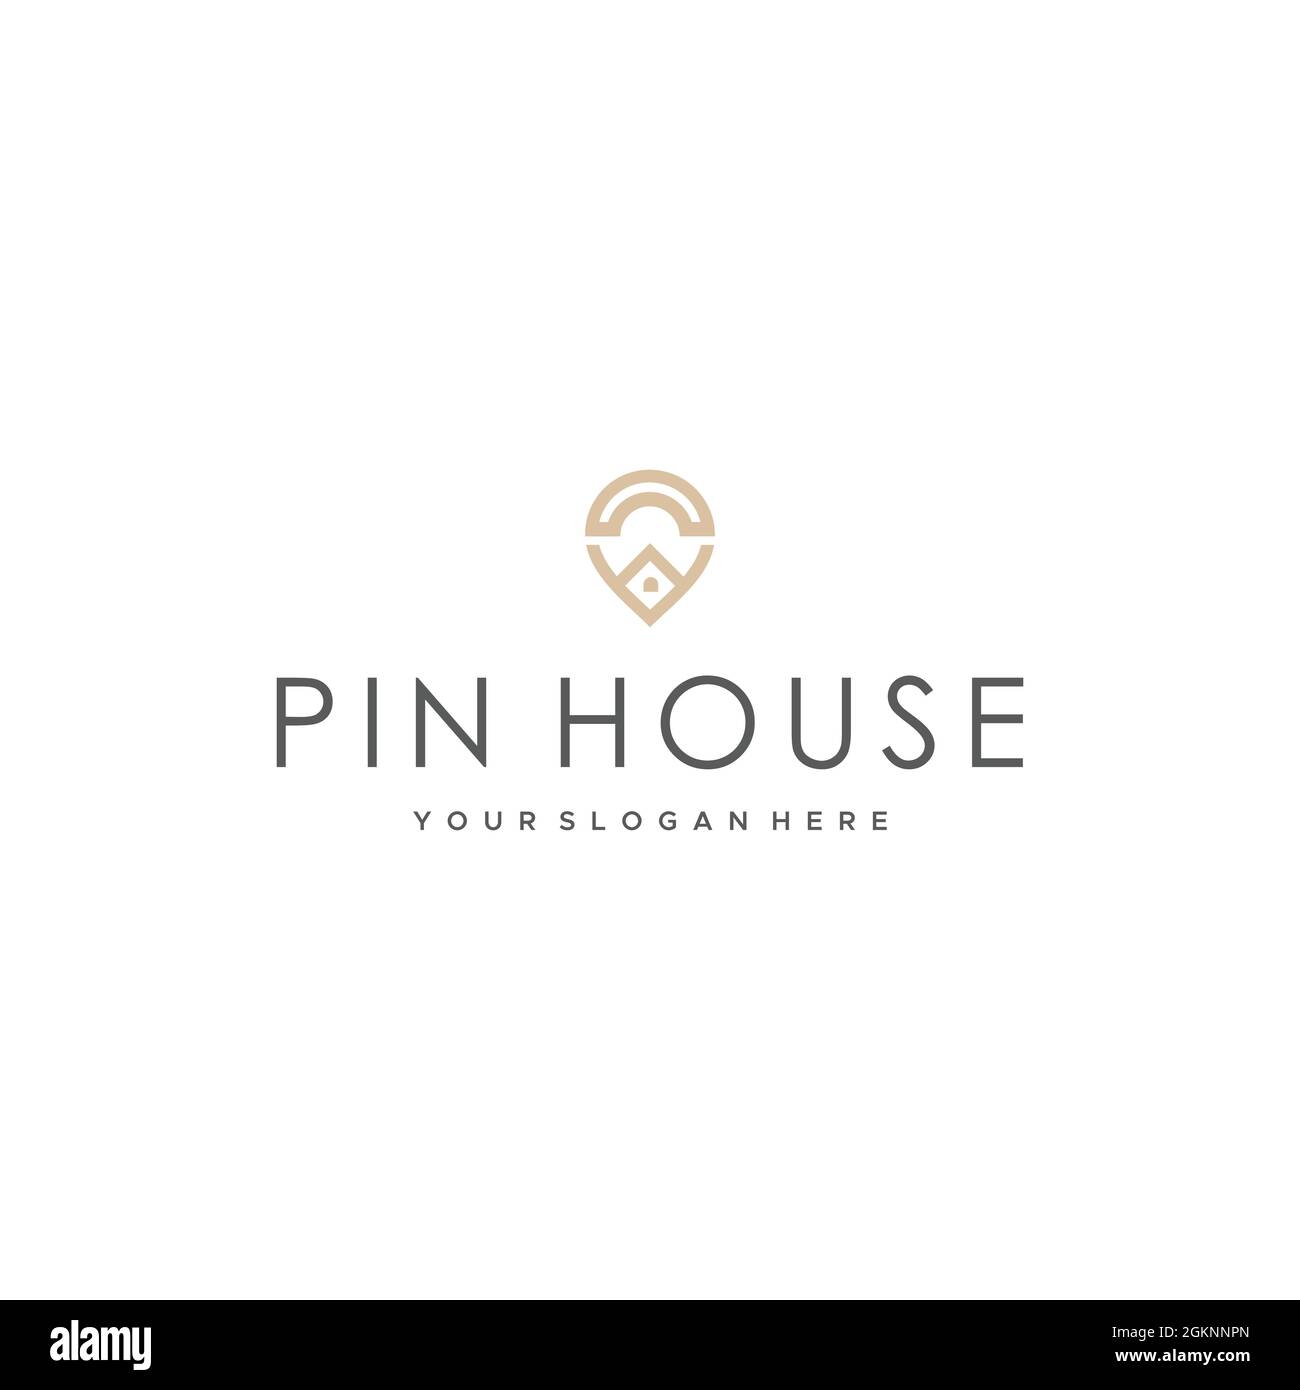 Pin on house & home